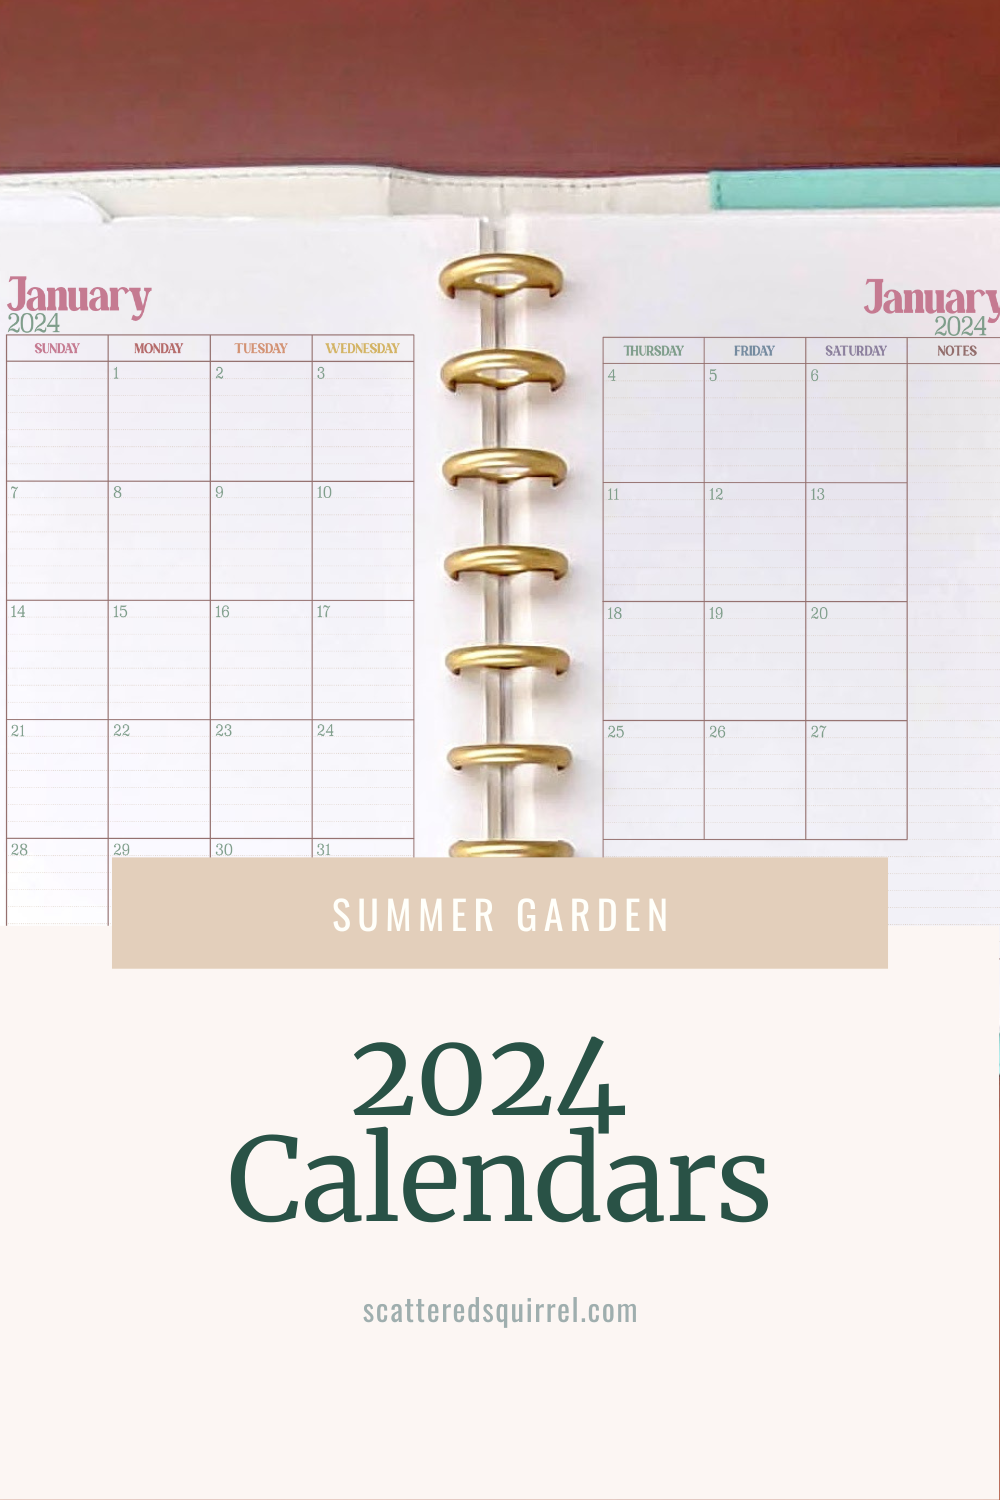 The 2024 Calendar Printables are Here!!! Scattered Squirrel